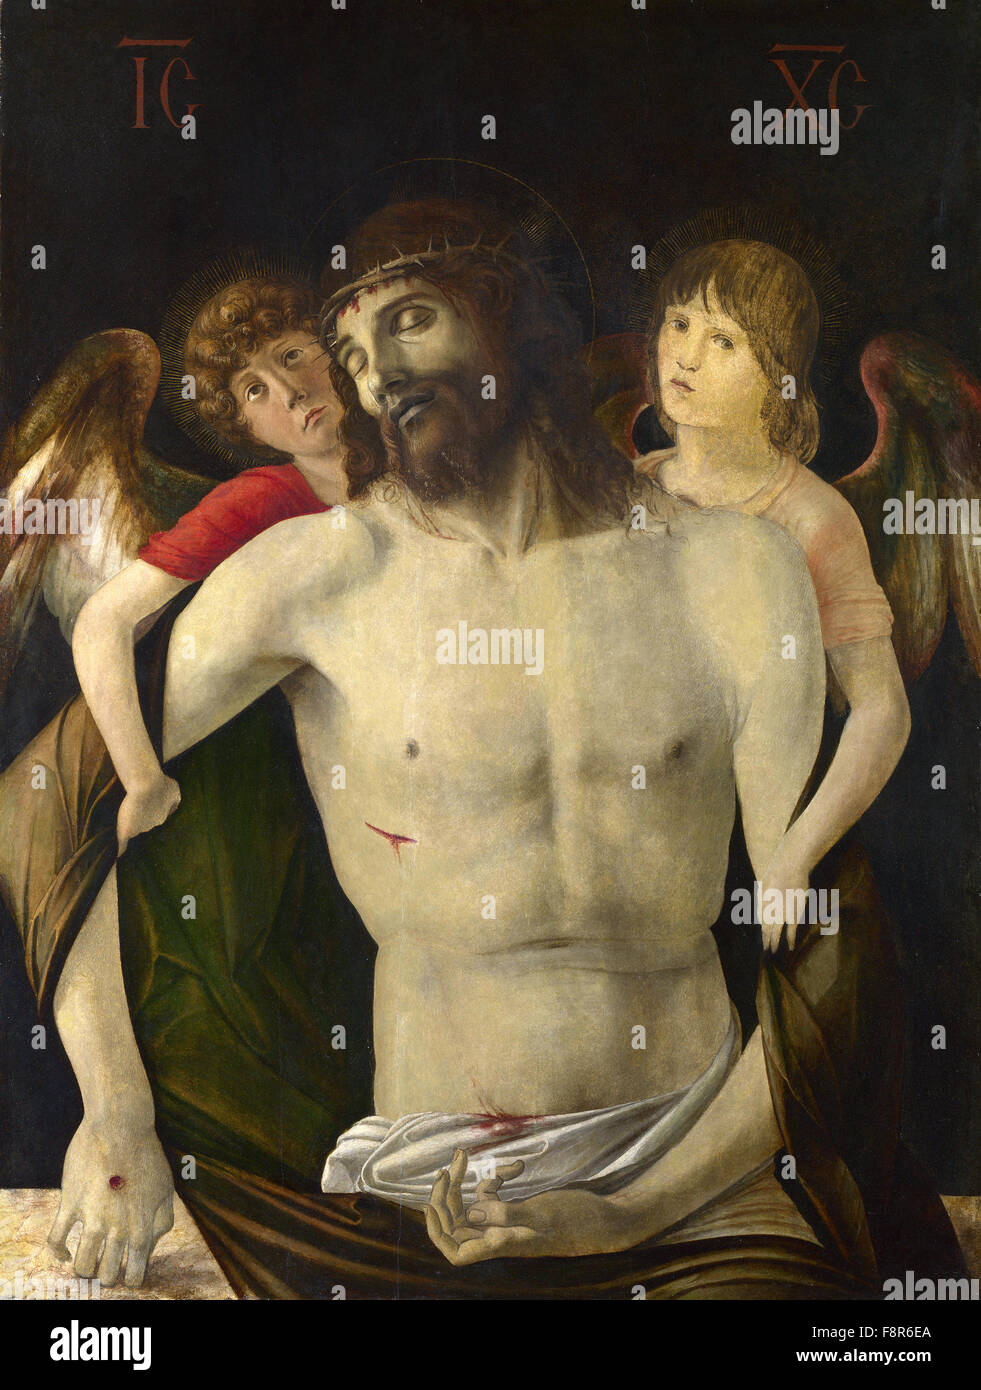 Giovanni Bellini - Giambellino - The Dead Christ supported by Angels Stock Photo